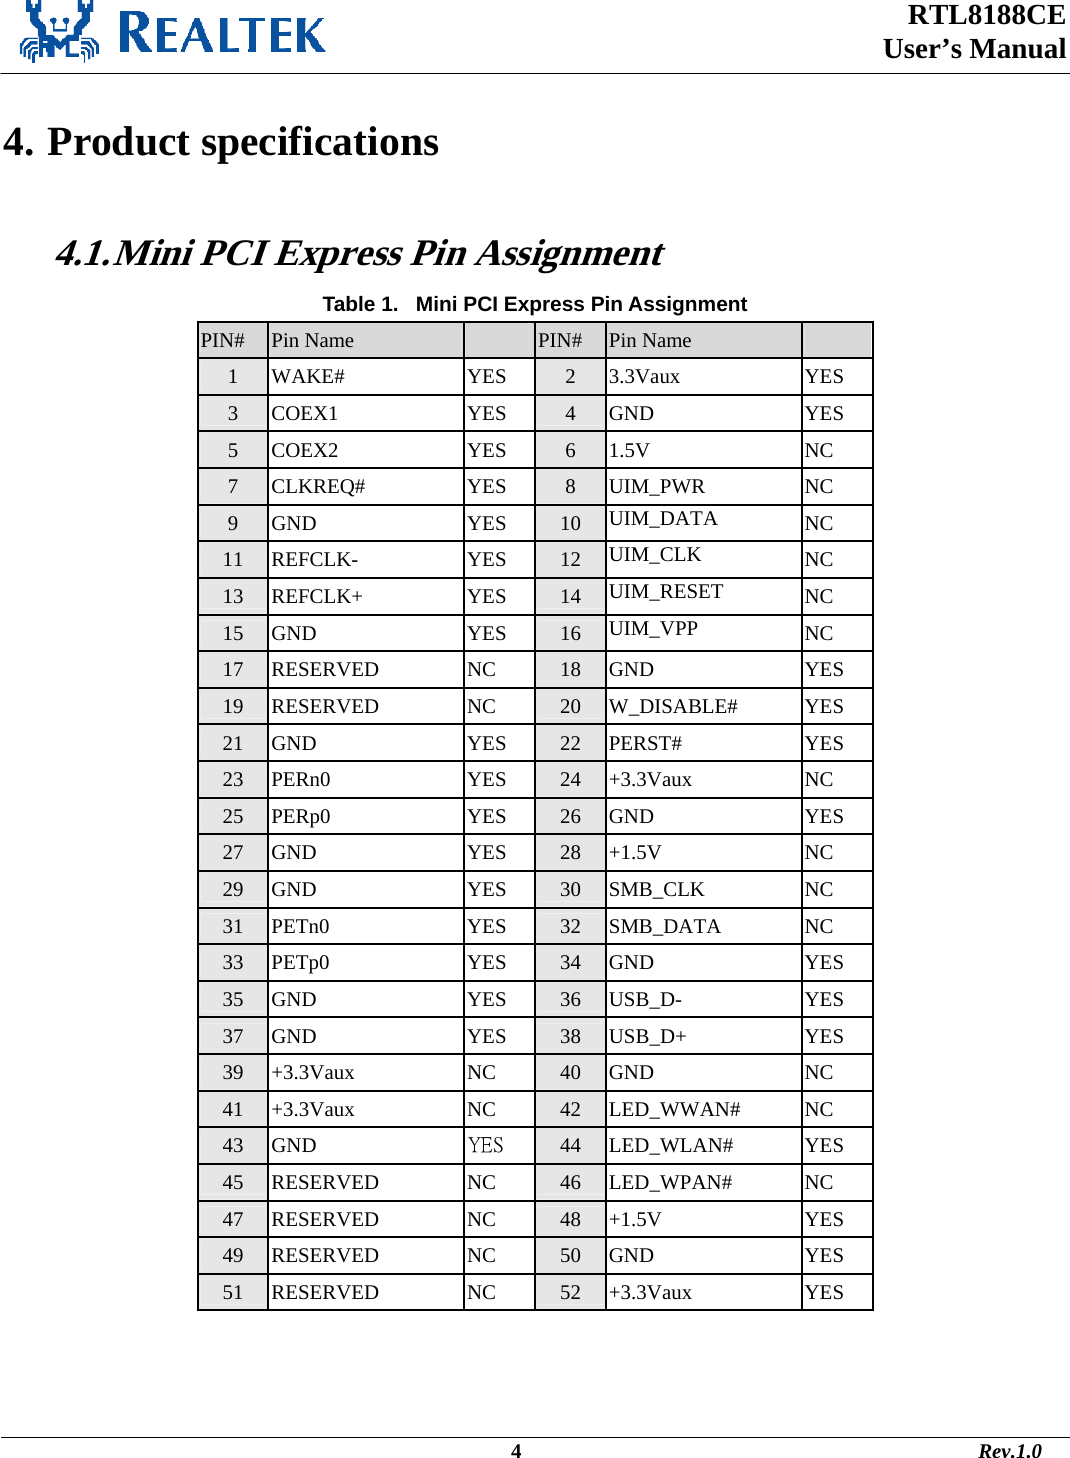  RTL8188CE  User’s Manual    4. Product specifications  4.1. Mini PCI Express Pin Assignment Table 1.   Mini PCI Express Pin Assignment PIN# Pin Name    PIN# Pin Name   1 WAKE# YES 2 3.3Vaux YES 3 COEX1 YES 4 GND YES 5 COEX2 YES 6 1.5V NC 7 CLKREQ# YES 8 UIM_PWR NC 9 GND YES 10 UIM_DATA  NC 11 REFCLK- YES 12 UIM_CLK  NC 13 REFCLK+ YES 14 UIM_RESET  NC 15 GND YES 16 UIM_VPP  NC 17 RESERVED NC 18 GND YES 19 RESERVED NC 20 W_DISABLE# YES 21 GND YES 22 PERST# YES 23 PERn0 YES 24 +3.3Vaux NC 25 PERp0 YES 26 GND YES 27 GND YES 28 +1.5V NC 29 GND YES 30 SMB_CLK NC 31 PETn0 YES 32 SMB_DATA NC 33 PETp0 YES 34 GND YES 35 GND YES 36 USB_D- YES 37 GND YES 38 USB_D+ YES 39 +3.3Vaux NC 40 GND NC 41 +3.3Vaux NC 42 LED_WWAN# NC 43 GND YES  44 LED_WLAN# YES 45 RESERVED NC 46 LED_WPAN# NC 47 RESERVED NC 48 +1.5V YES 49 RESERVED NC 50 GND YES 51 RESERVED NC 52 +3.3Vaux YES                                                                                              4                                                                                       Rev.1.0 